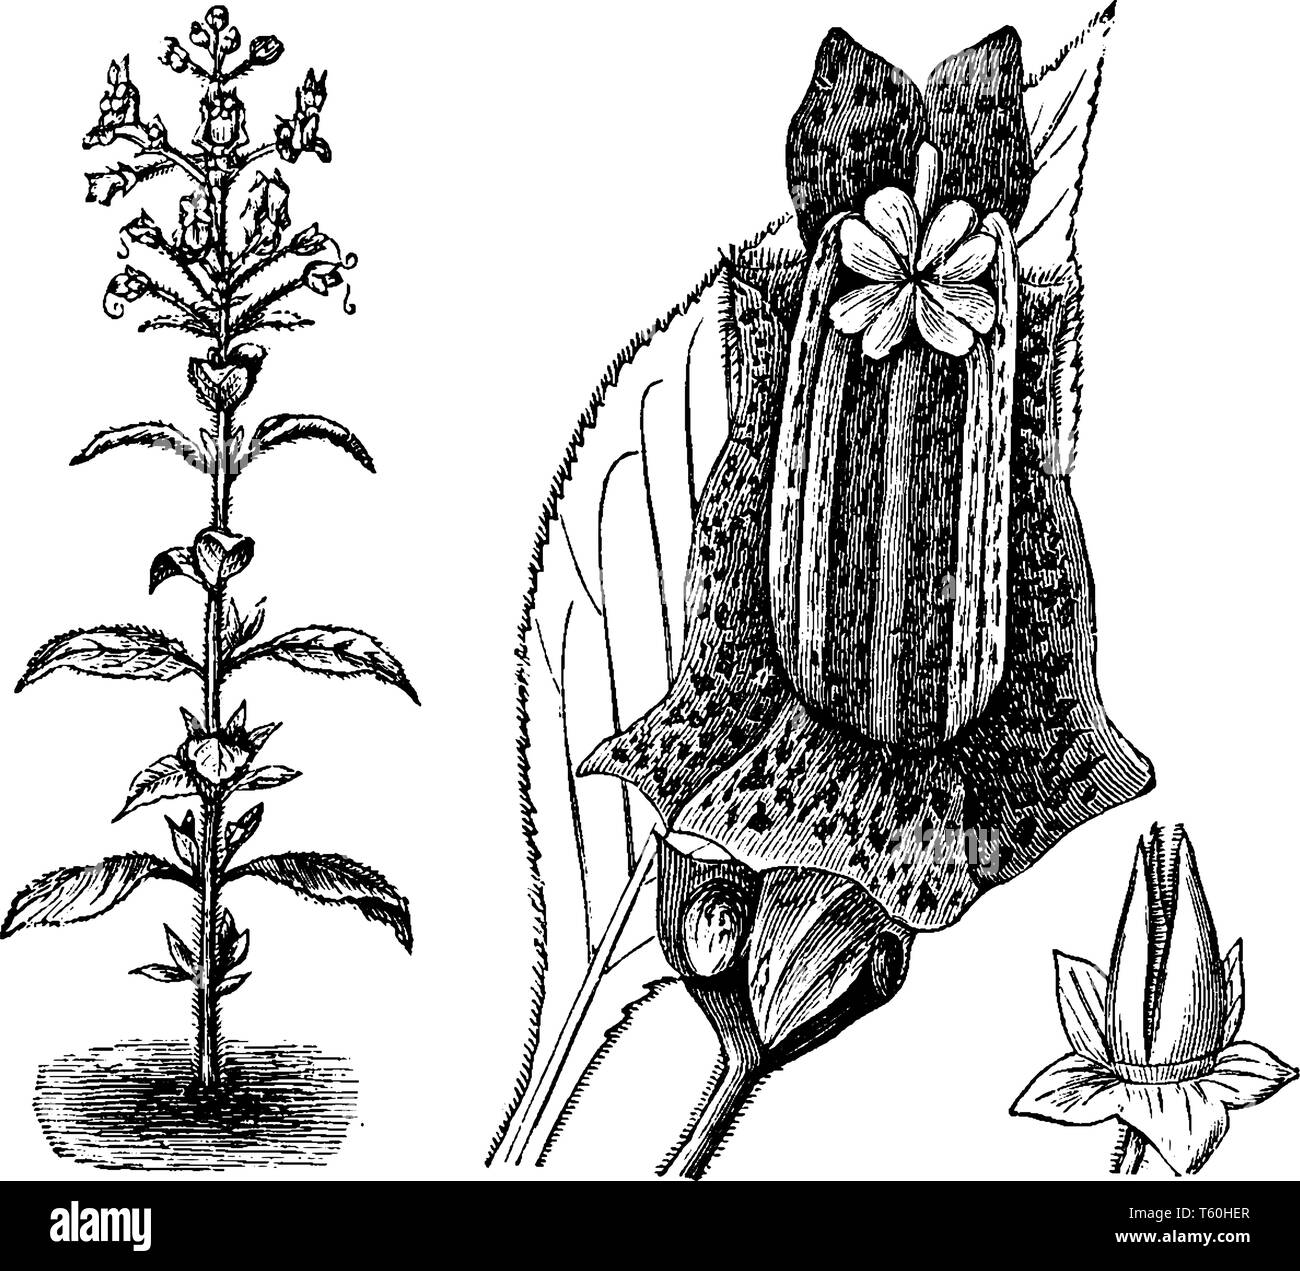 An image showing the plants and flowers of Lietzia Brasiliensis, they are leaf and stem-haired, vintage line drawing or engraving illustration. Stock Vector